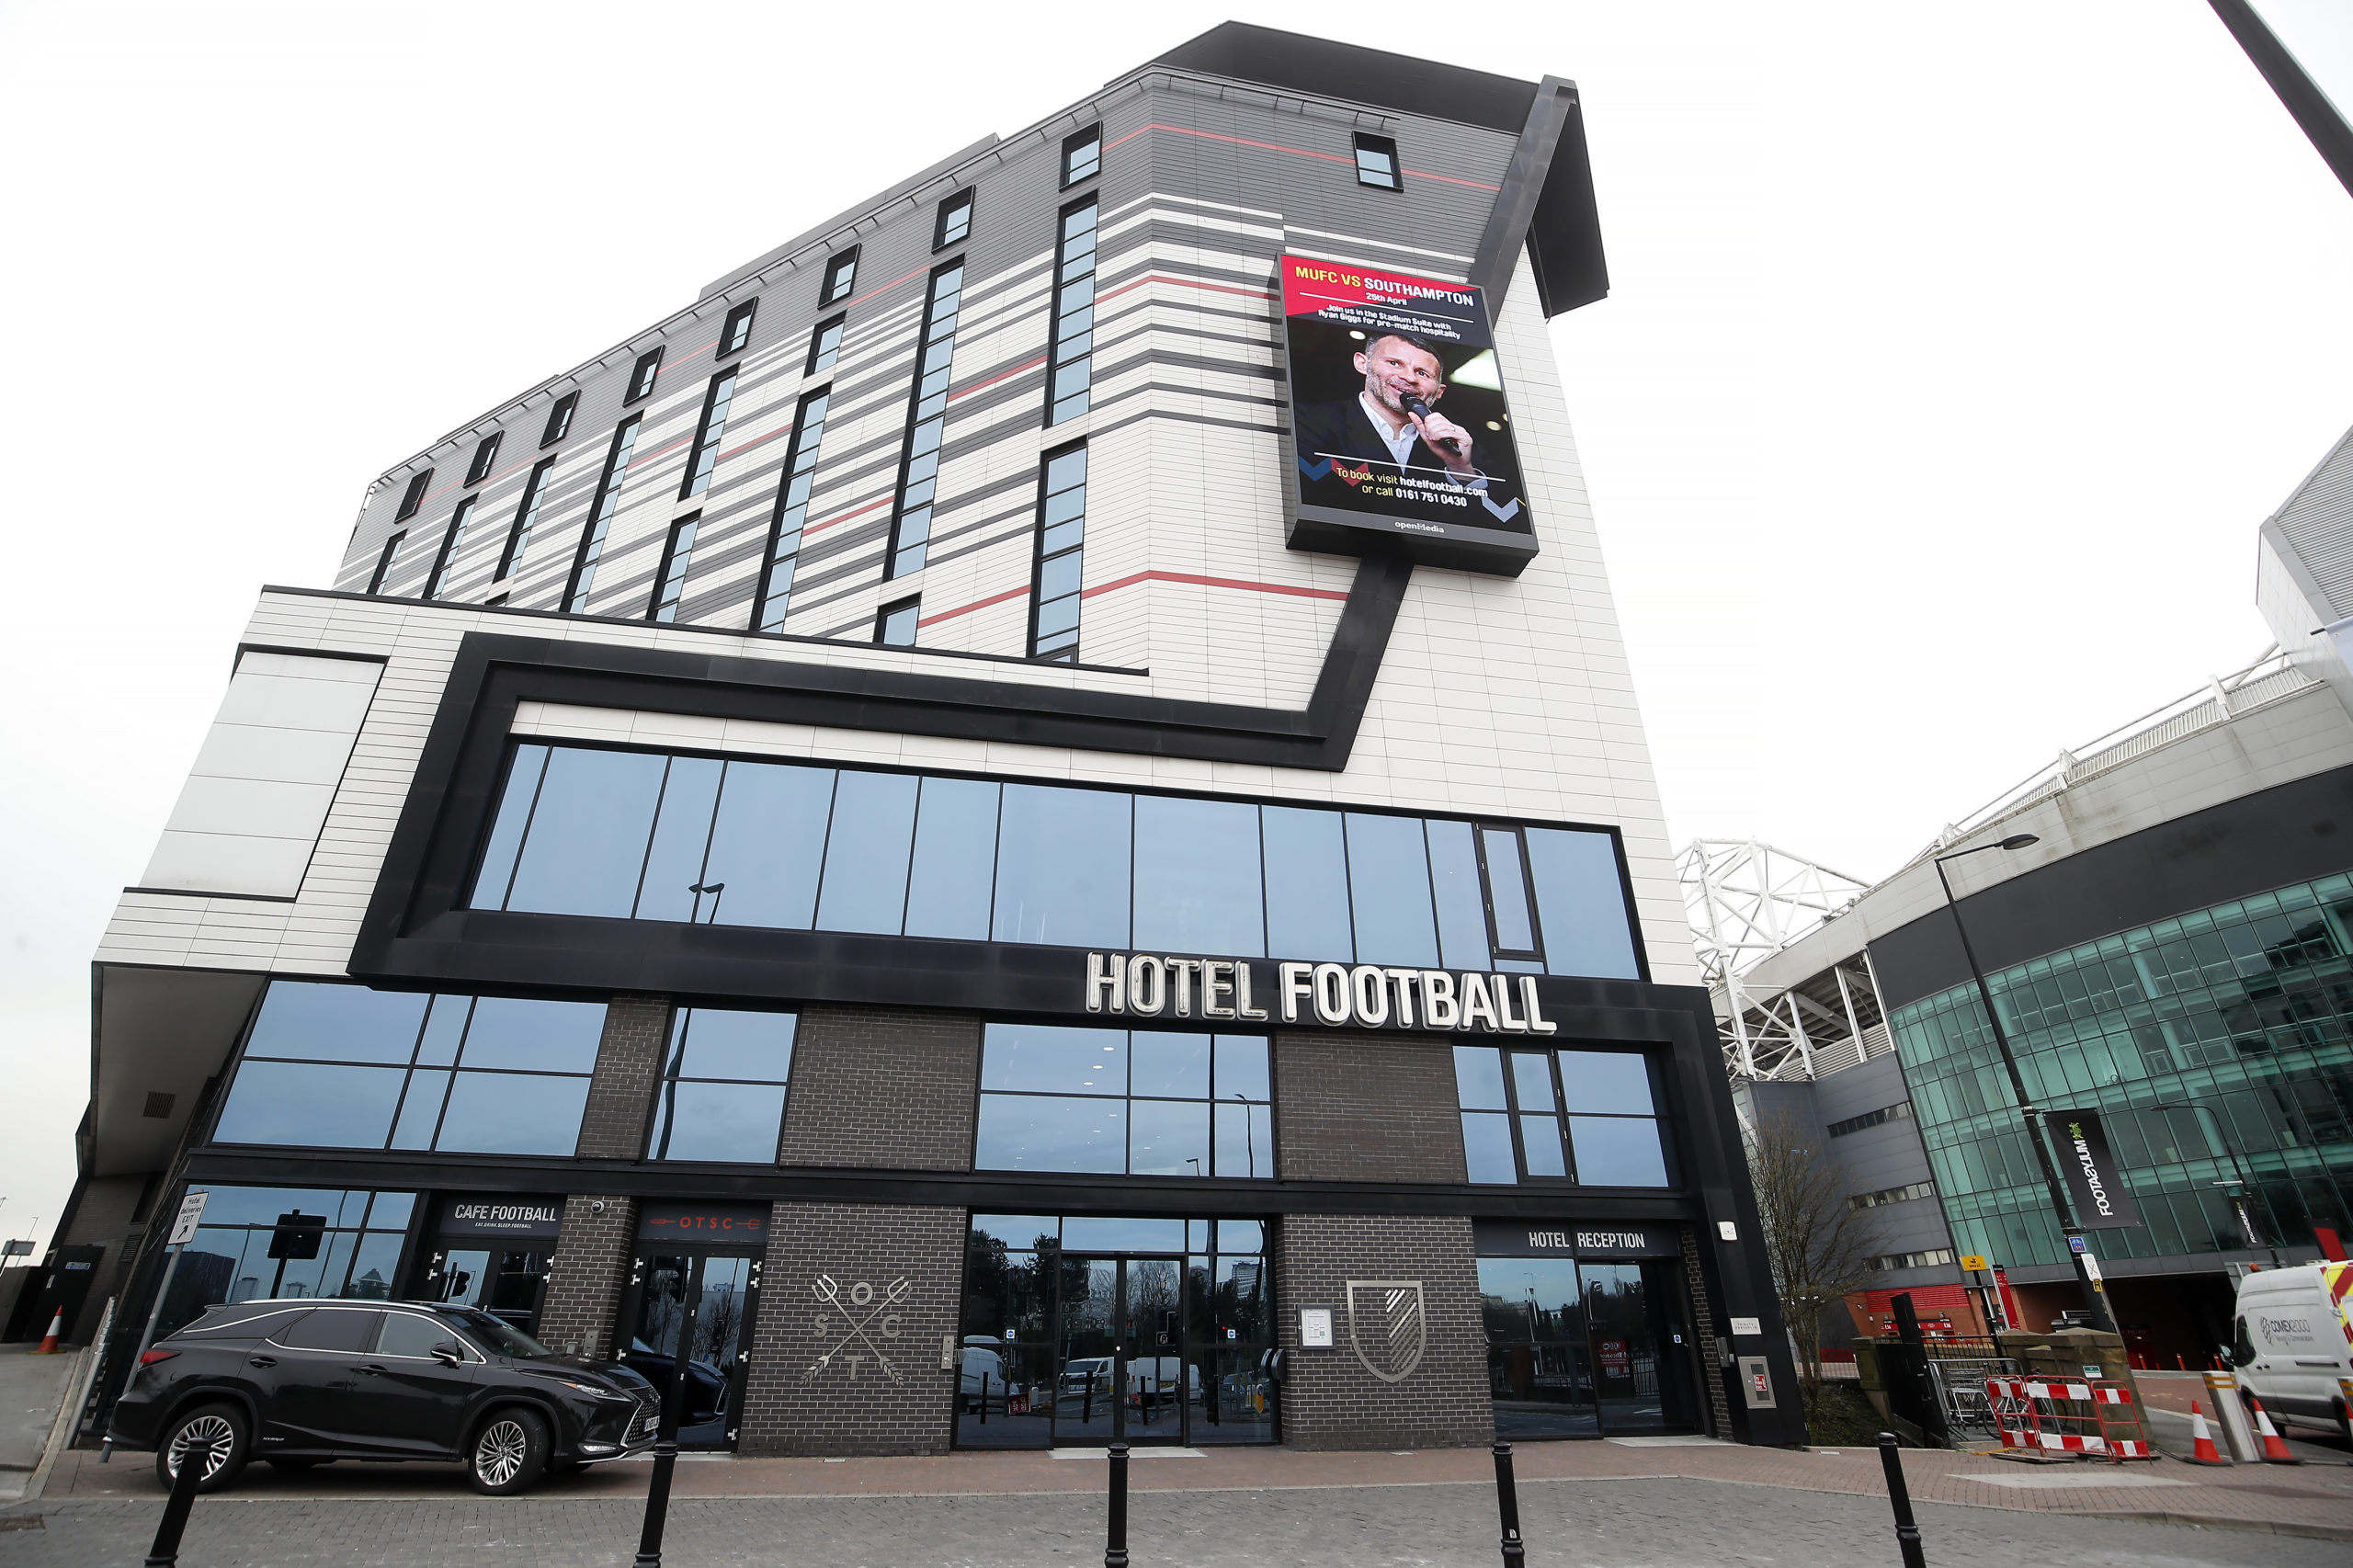 Hotel Football, owned by Gary Neville and Ryan Giggs, has been made available to NHS staff for free during the coronavirus crisis